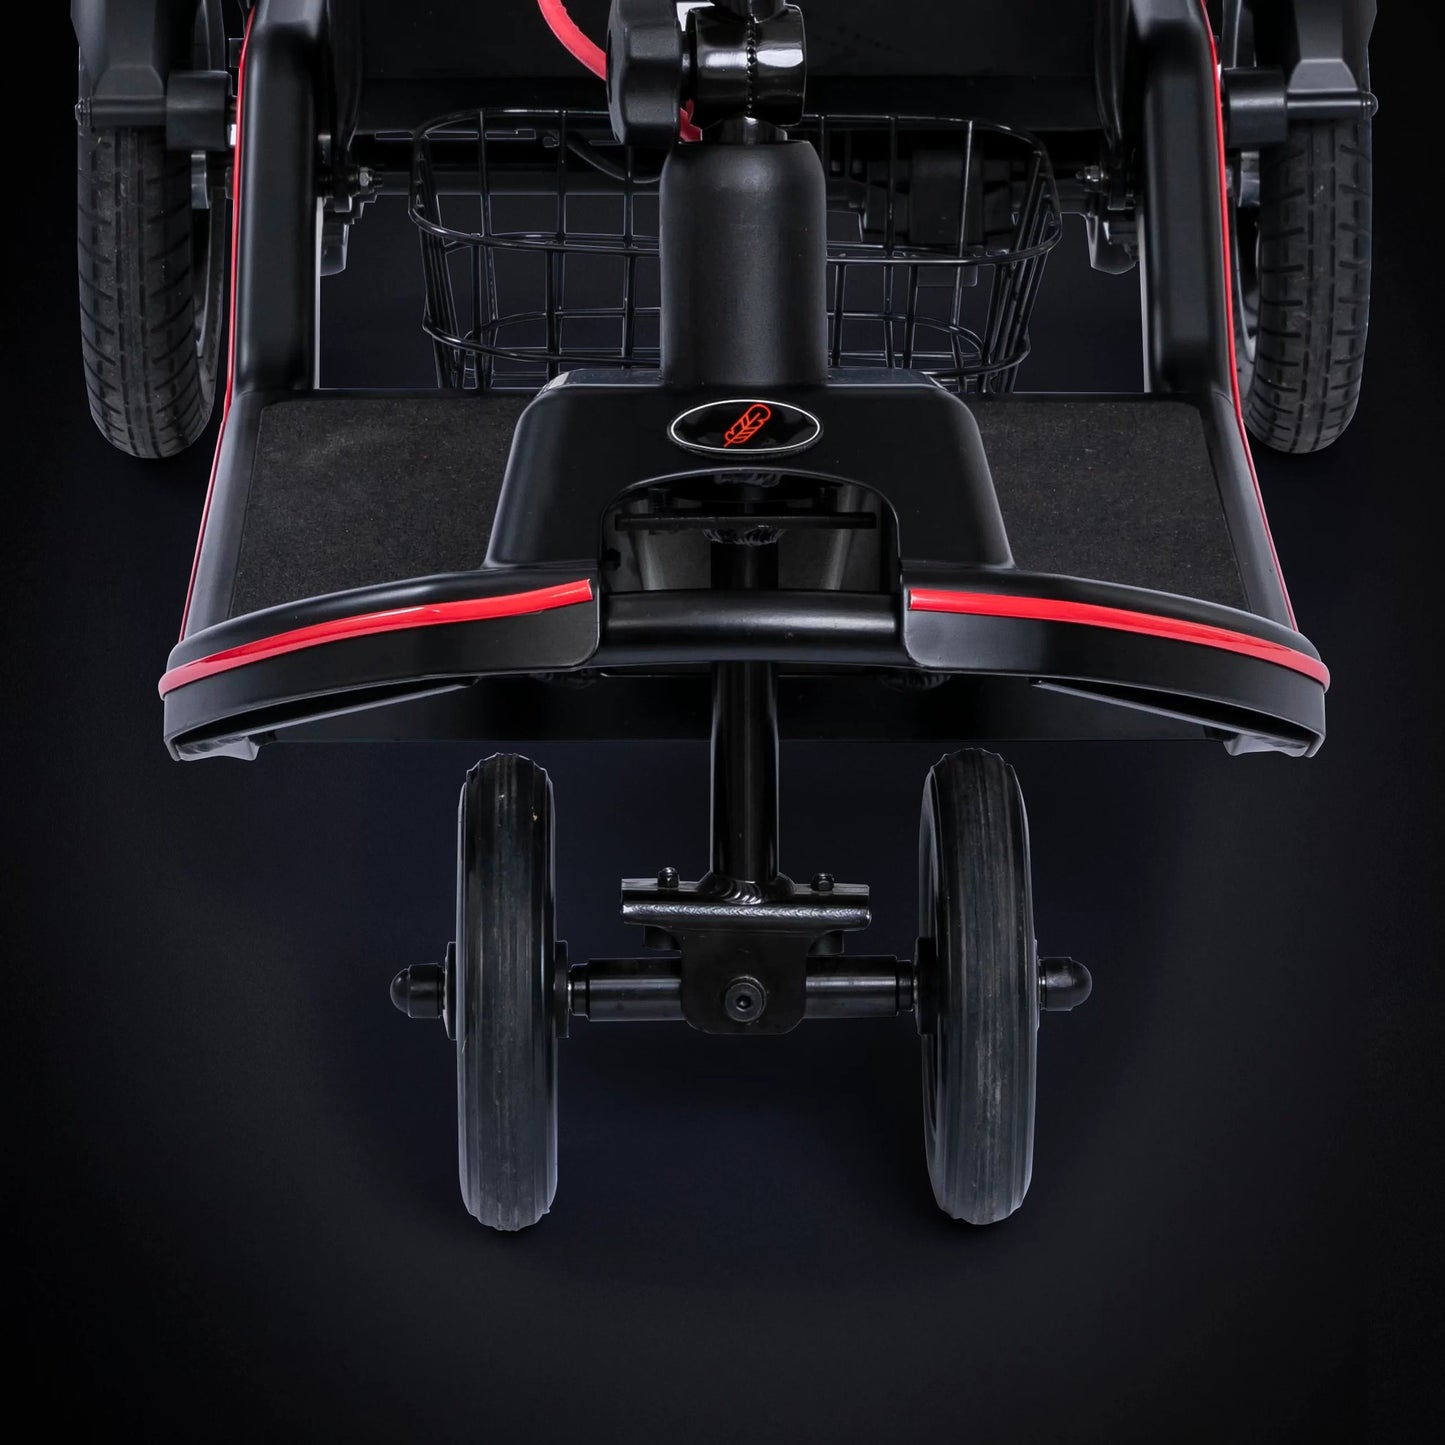 Scooterpac Feather Fold Mobility Scooter – Sleek and Lightweight 16.8 kg